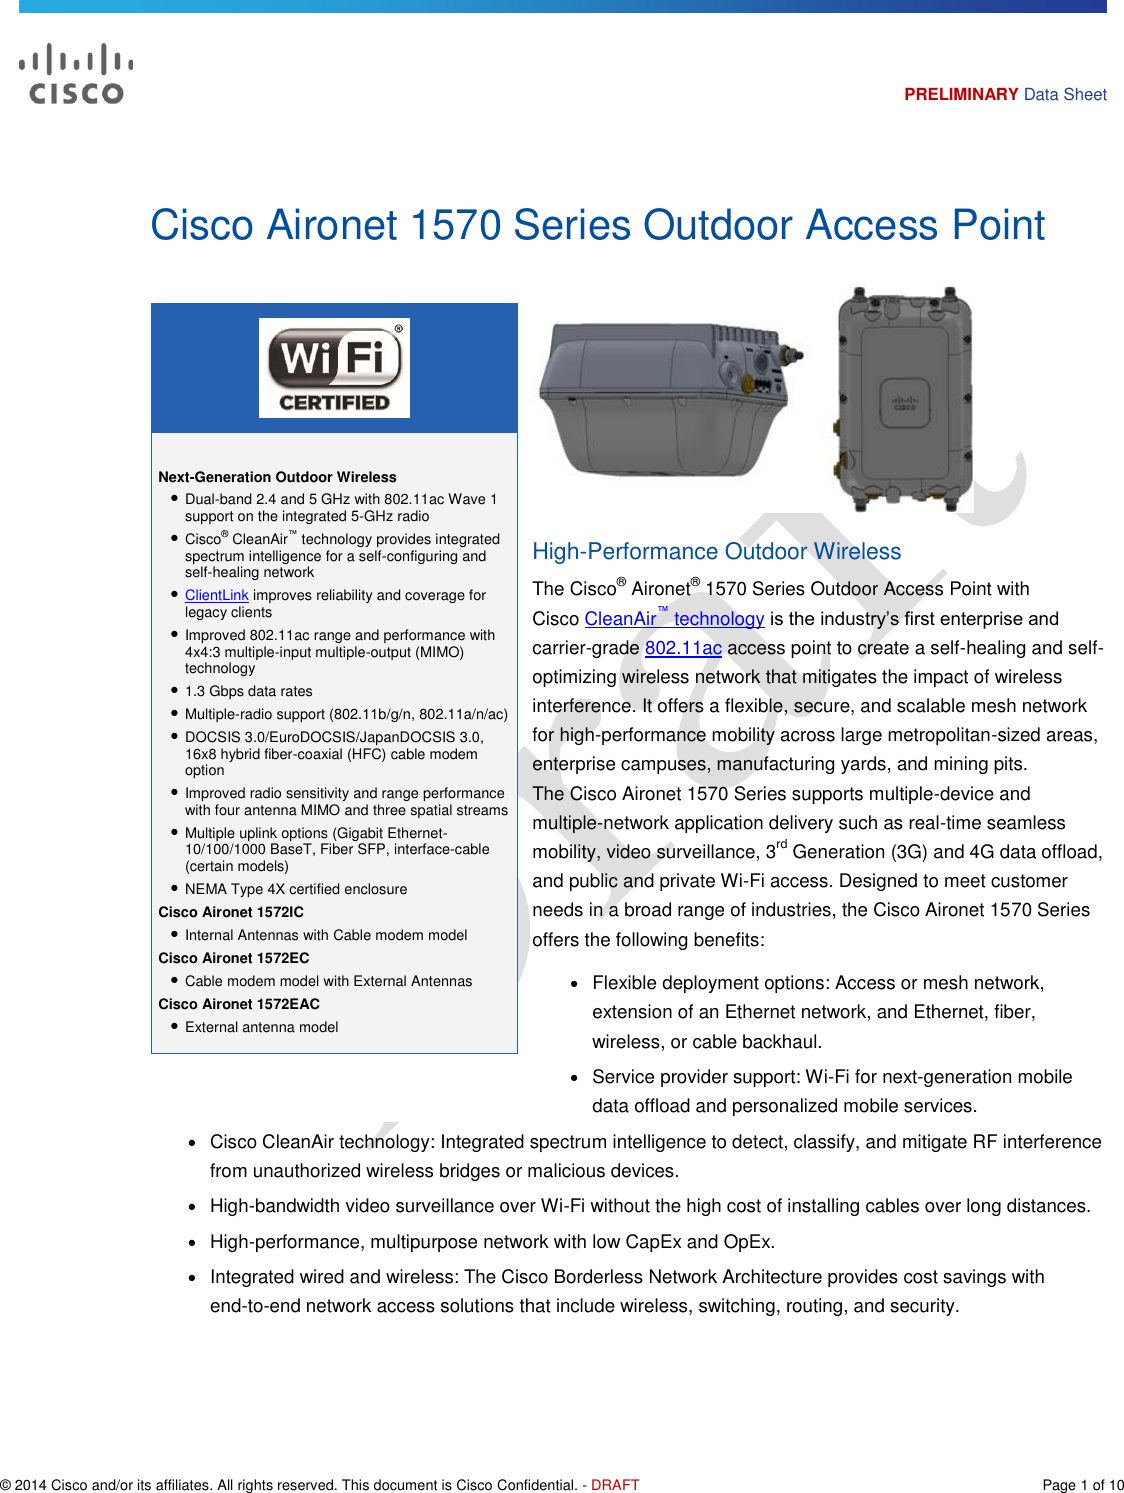   © 2014 Cisco and/or its affiliates. All rights reserved. This document is Cisco Confidential. - DRAFT  Page 1 of 10 PRELIMINARY Data Sheet   Next-Generation Outdoor Wireless ● Dual-band 2.4 and 5 GHz with 802.11ac Wave 1 support on the integrated 5-GHz radio  ● Cisco® CleanAir™ technology provides integrated spectrum intelligence for a self-configuring and self-healing network ● ClientLink improves reliability and coverage for legacy clients ● Improved 802.11ac range and performance with 4x4:3 multiple-input multiple-output (MIMO) technology ● 1.3 Gbps data rates ● Multiple-radio support (802.11b/g/n, 802.11a/n/ac) ● DOCSIS 3.0/EuroDOCSIS/JapanDOCSIS 3.0, 16x8 hybrid fiber-coaxial (HFC) cable modem option ● Improved radio sensitivity and range performance with four antenna MIMO and three spatial streams ● Multiple uplink options (Gigabit Ethernet-10/100/1000 BaseT, Fiber SFP, interface-cable (certain models) ● NEMA Type 4X certified enclosure Cisco Aironet 1572IC ● Internal Antennas with Cable modem model Cisco Aironet 1572EC ● Cable modem model with External Antennas Cisco Aironet 1572EAC ● External antenna model  Cisco Aironet 1570 Series Outdoor Access Point  High-Performance Outdoor Wireless The Cisco® Aironet® 1570 Series Outdoor Access Point with Cisco CleanAir™ technology is the industry’s first enterprise and carrier-grade 802.11ac access point to create a self-healing and self-optimizing wireless network that mitigates the impact of wireless interference. It offers a flexible, secure, and scalable mesh network for high-performance mobility across large metropolitan-sized areas, enterprise campuses, manufacturing yards, and mining pits. The Cisco Aironet 1570 Series supports multiple-device and multiple-network application delivery such as real-time seamless mobility, video surveillance, 3rd Generation (3G) and 4G data offload, and public and private Wi-Fi access. Designed to meet customer needs in a broad range of industries, the Cisco Aironet 1570 Series offers the following benefits: ● Flexible deployment options: Access or mesh network, extension of an Ethernet network, and Ethernet, fiber, wireless, or cable backhaul. ● Service provider support: Wi-Fi for next-generation mobile data offload and personalized mobile services. ● Cisco CleanAir technology: Integrated spectrum intelligence to detect, classify, and mitigate RF interference from unauthorized wireless bridges or malicious devices. ● High-bandwidth video surveillance over Wi-Fi without the high cost of installing cables over long distances. ● High-performance, multipurpose network with low CapEx and OpEx. ● Integrated wired and wireless: The Cisco Borderless Network Architecture provides cost savings with end-to-end network access solutions that include wireless, switching, routing, and security. 